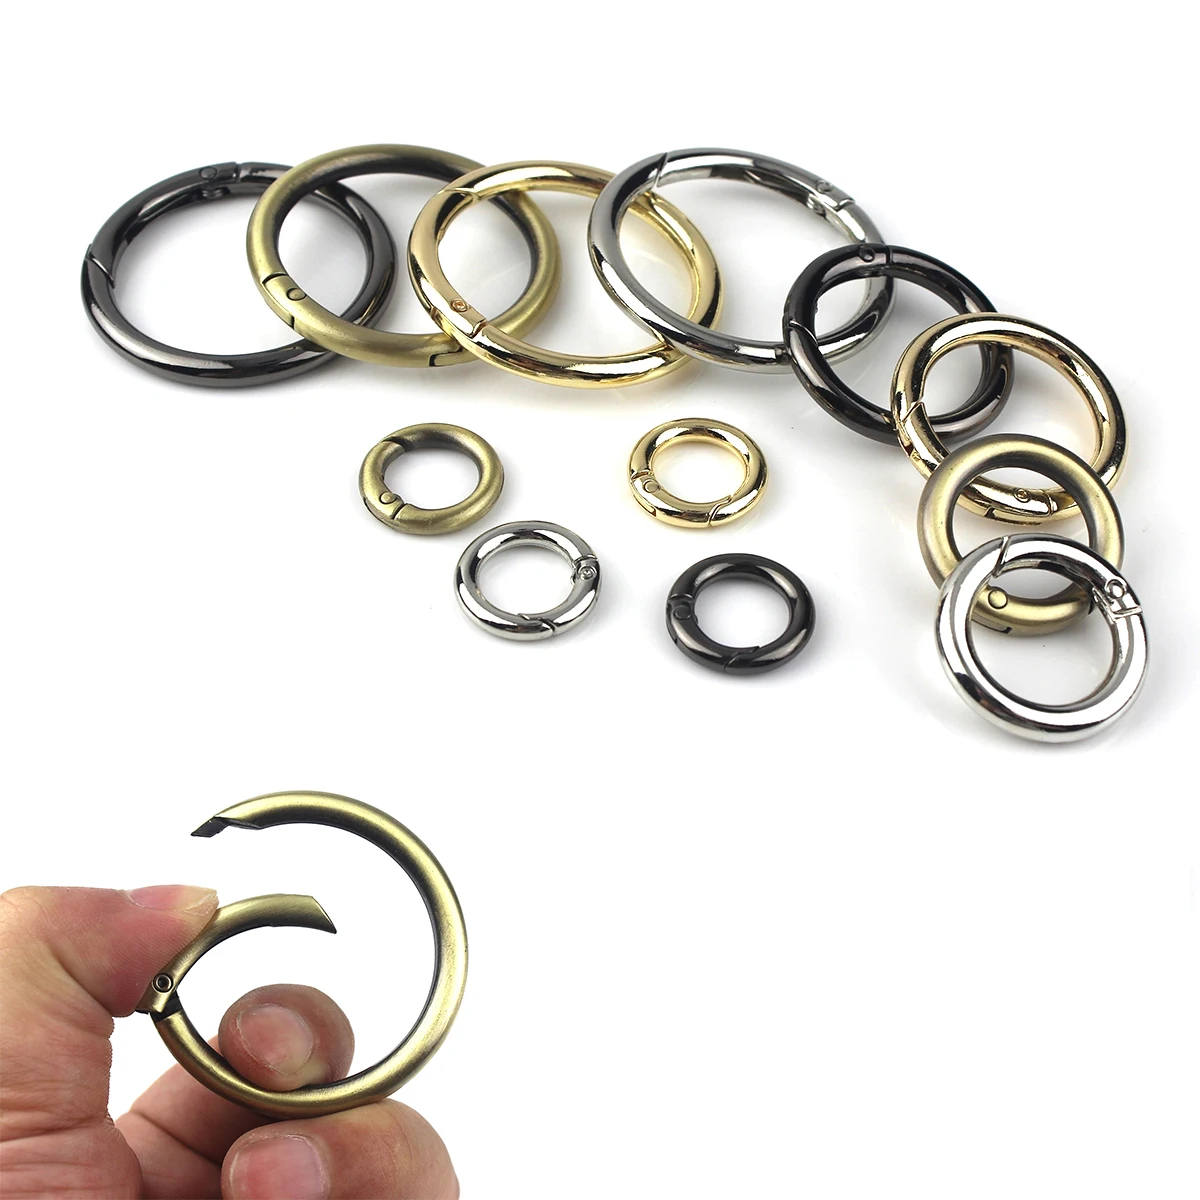 Metal spring gate O Ring Openable Keyring Leather Craft Bag belt strap buckle trigger snap clasp clip connector DIY accessory